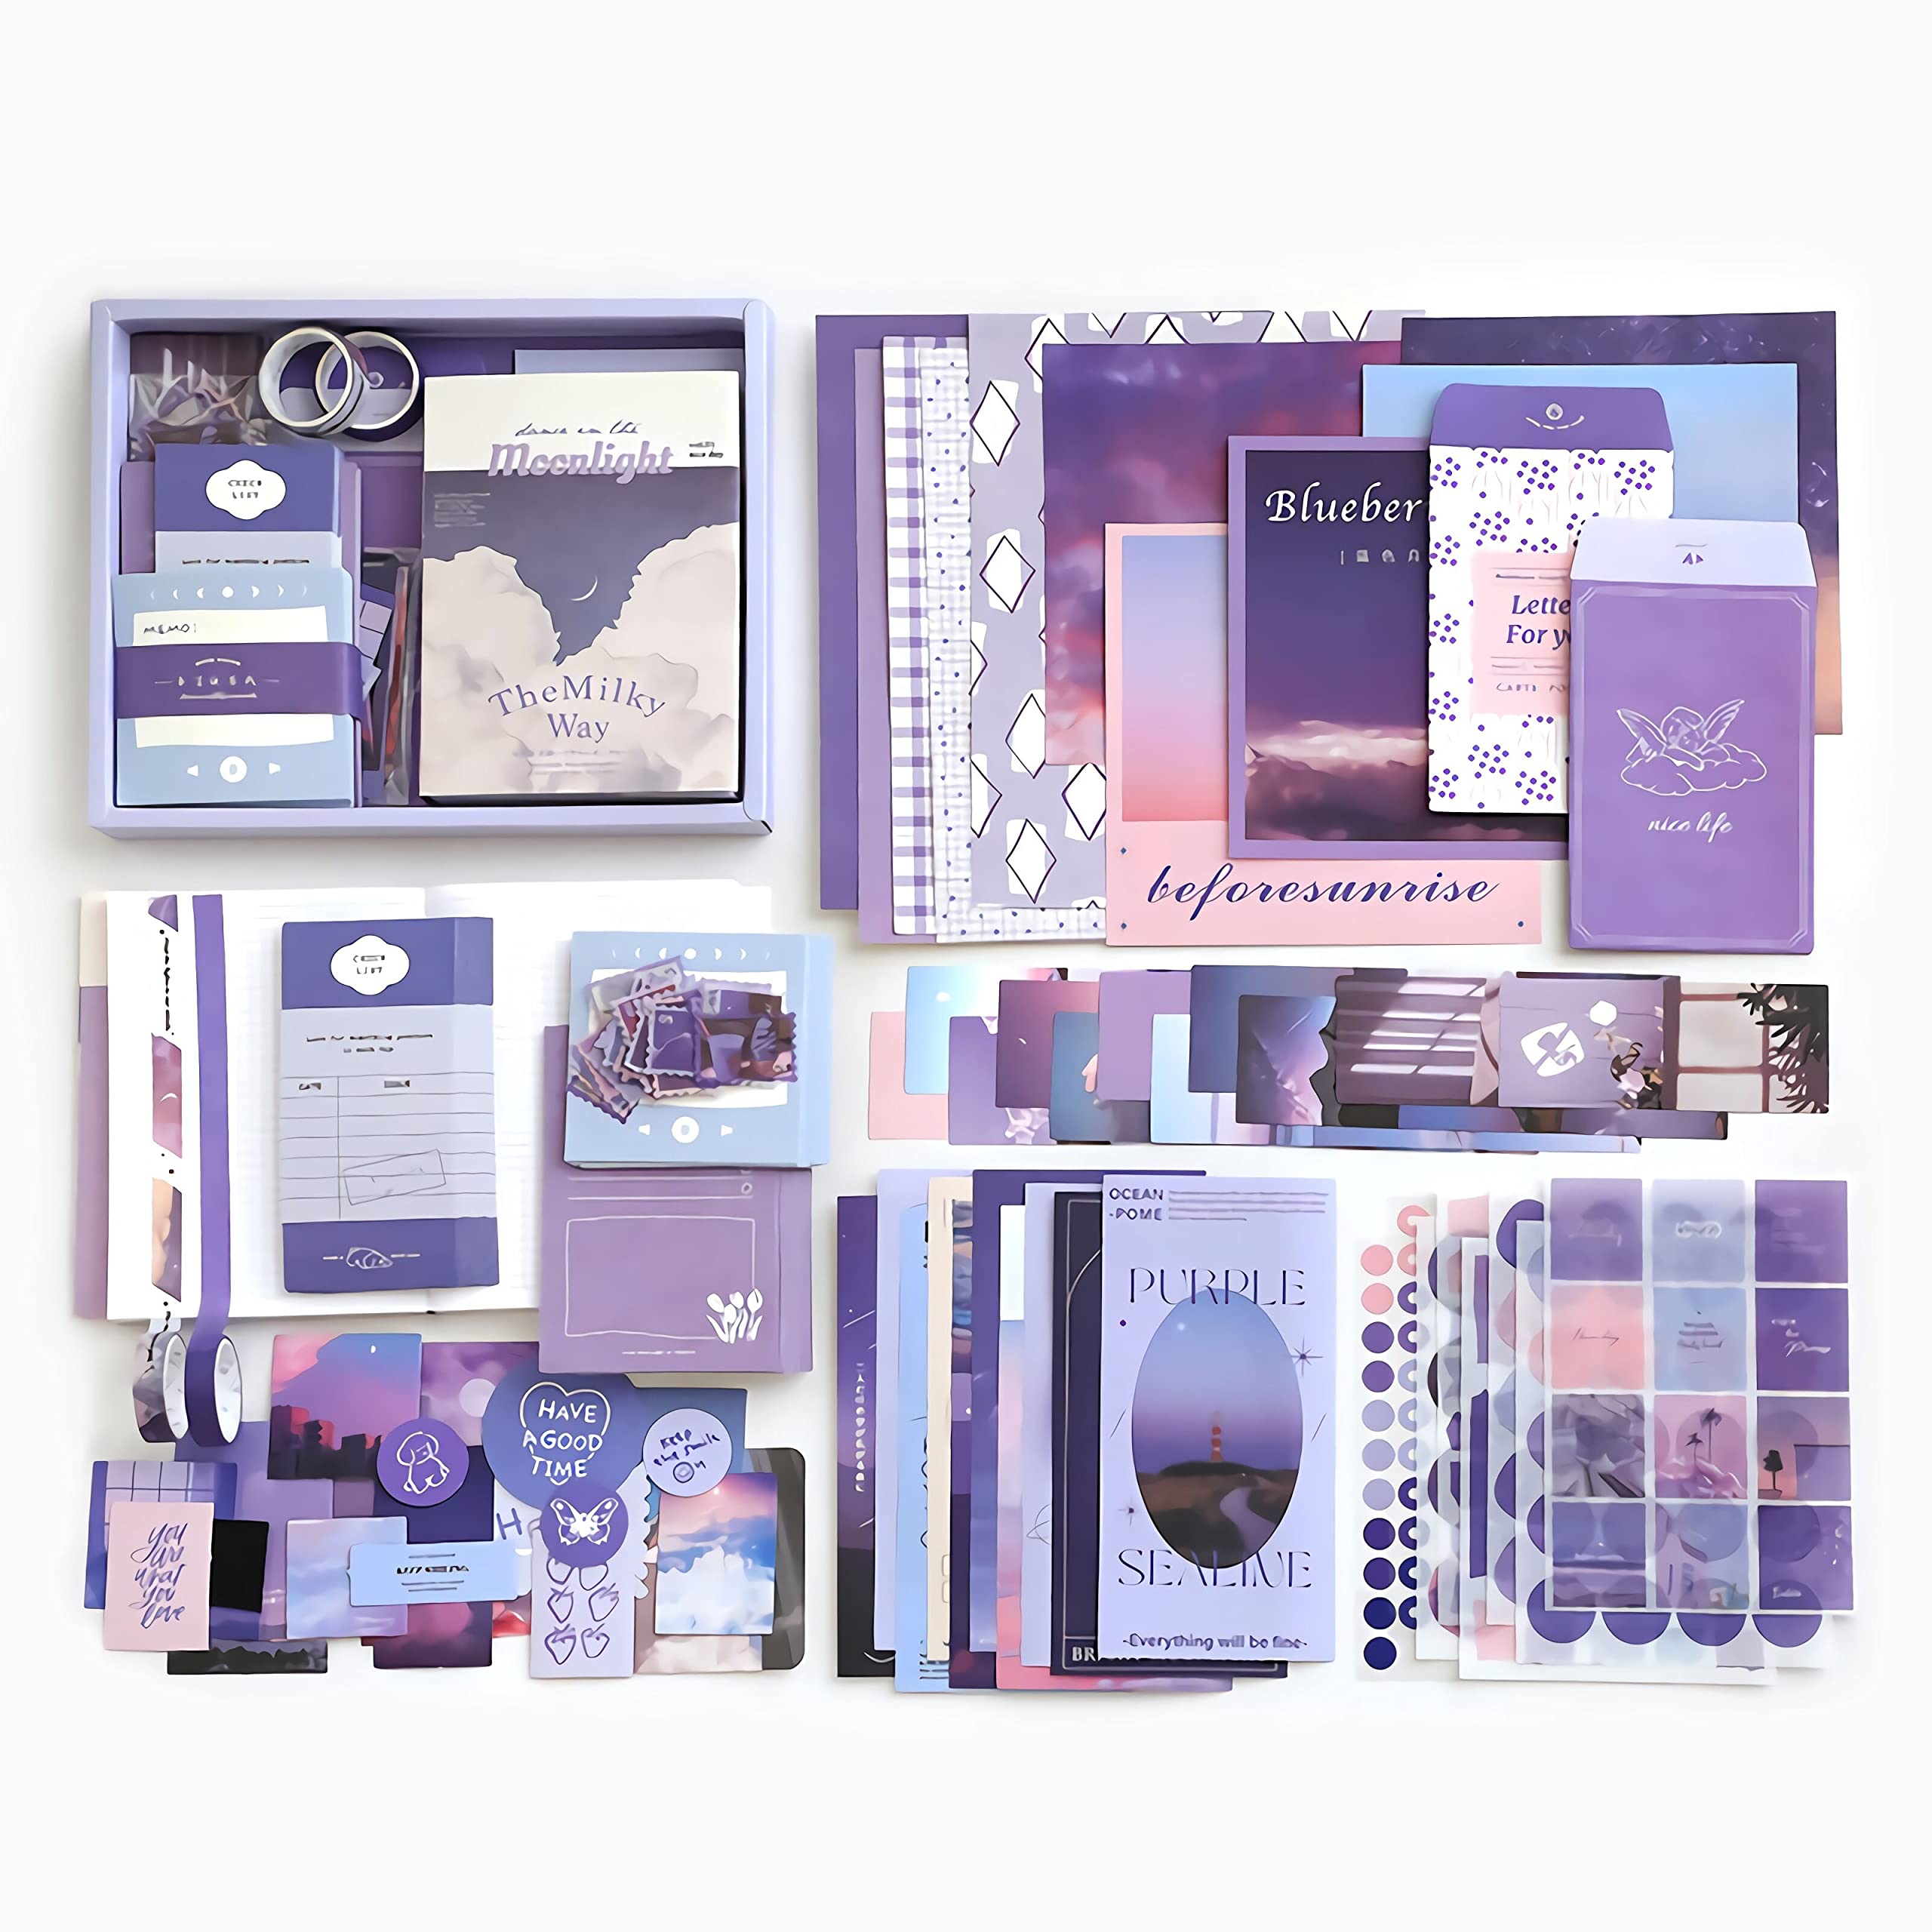 LA QUEENIE Aesthetic Scrapbook Kit,326pcs Scrapbooking Supplies Kit,Art Journaling  Supplies with Stationery,A6 Grid